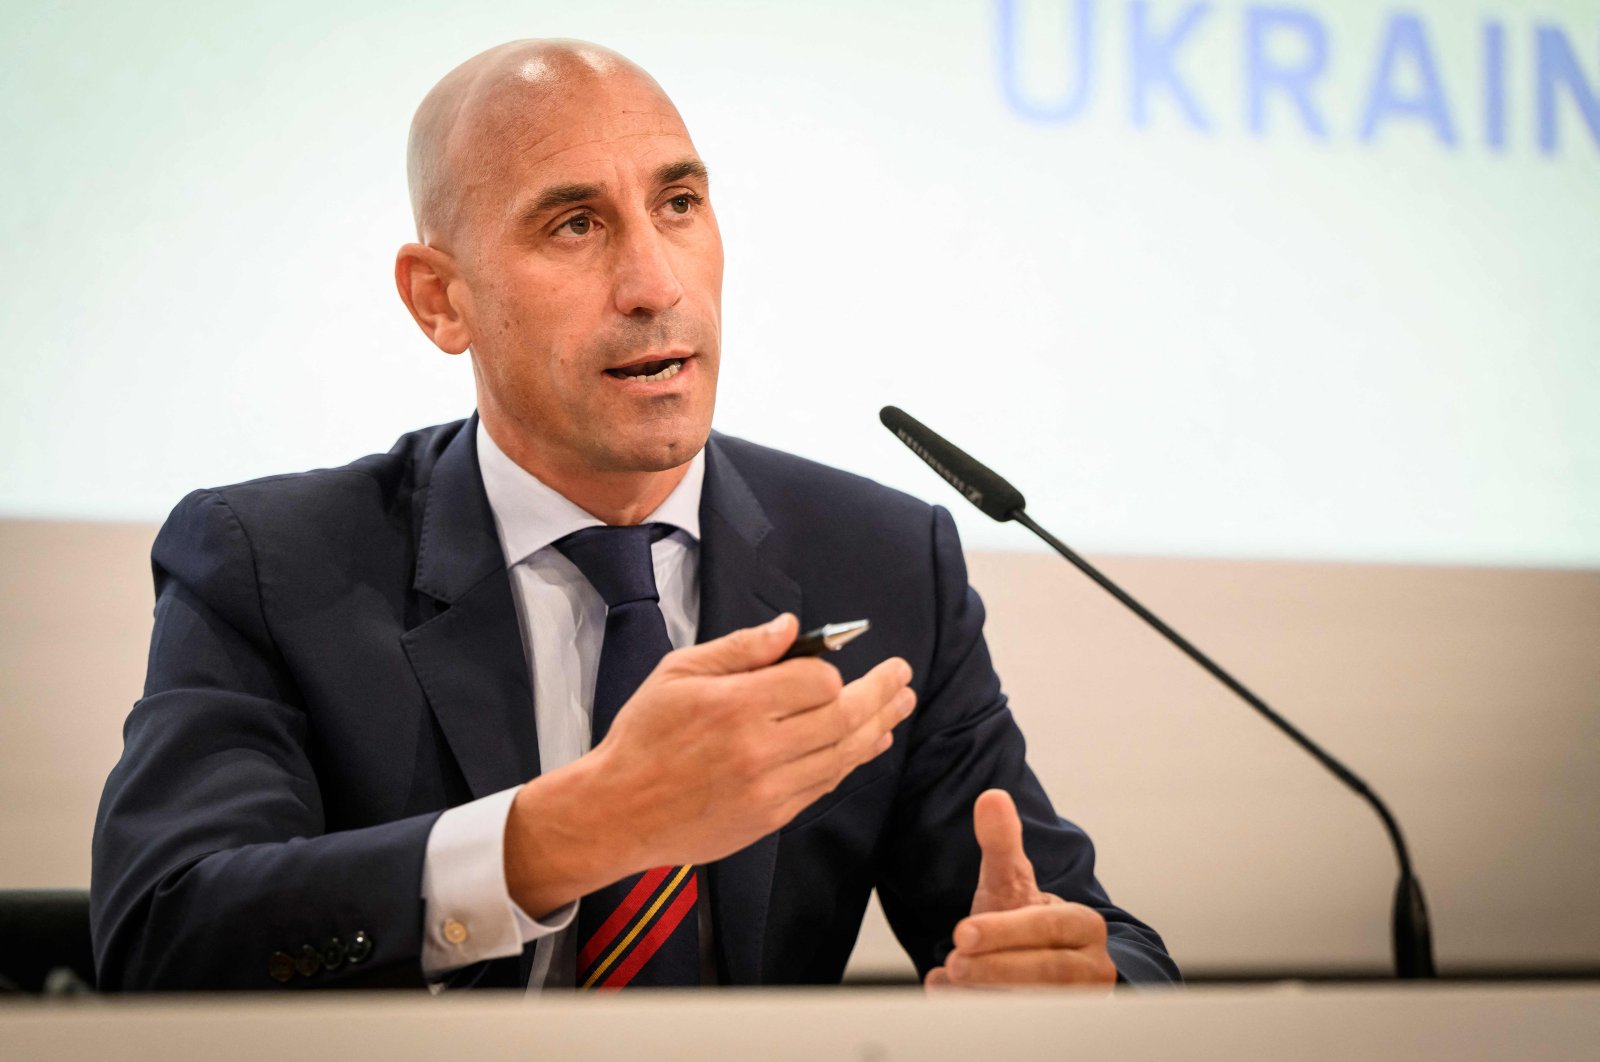 President of the Spanish Football Federation Luis Rubiales speaks during a press conference to announce Spain, Portugal and Ukraine&#039;s bids for the 2030 World Cup at the UEFA headquarters, Nyon, Switzerland, Oct. 5, 2022. (AFP Photo)